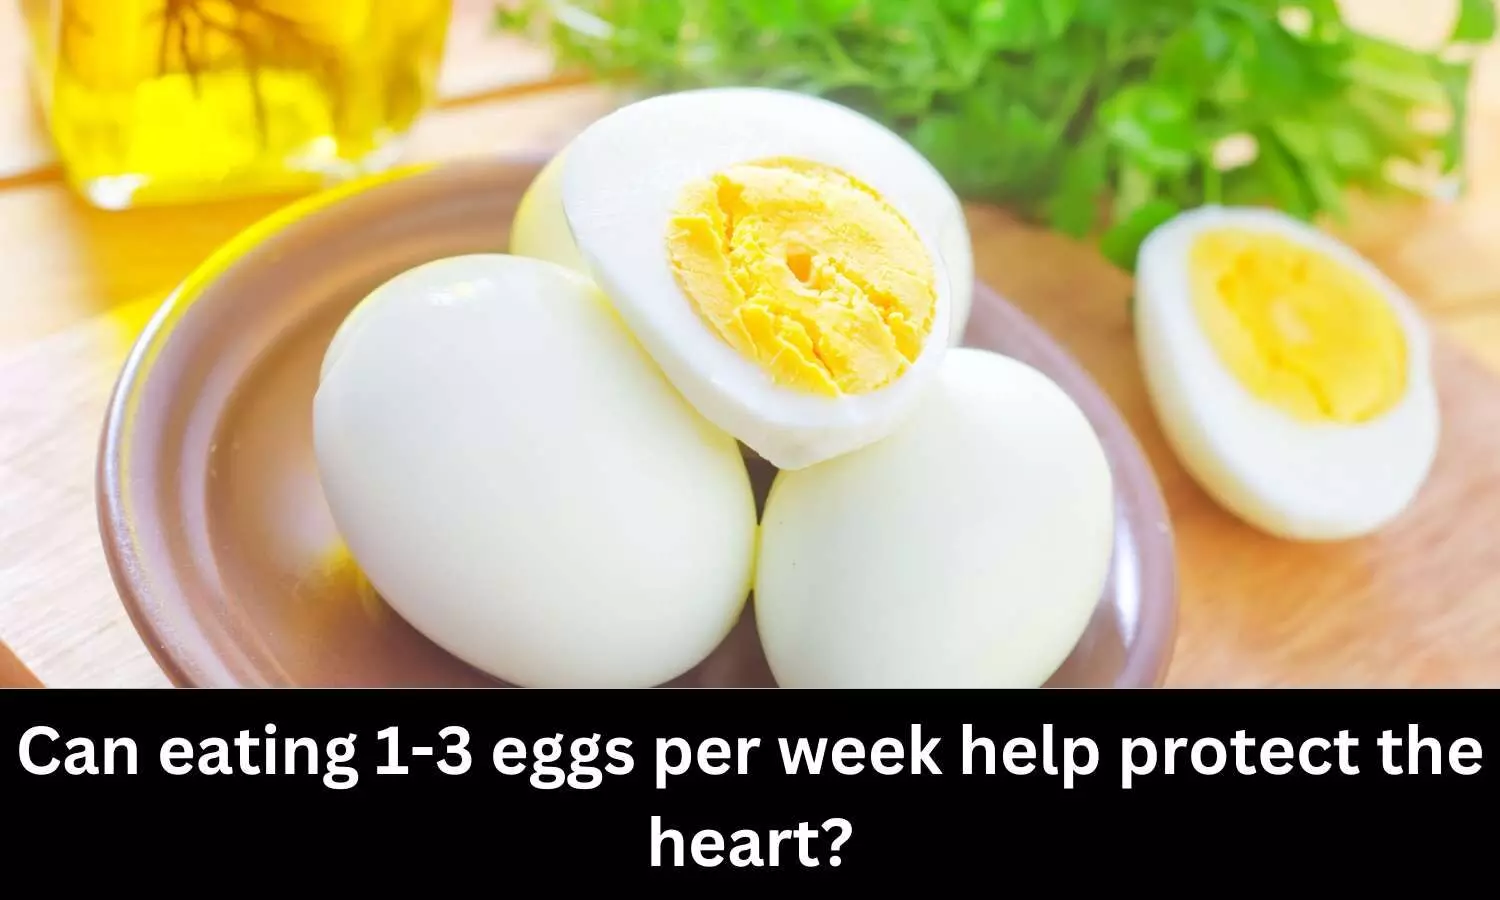 Can eating 1-3 eggs per week help protect the heart?